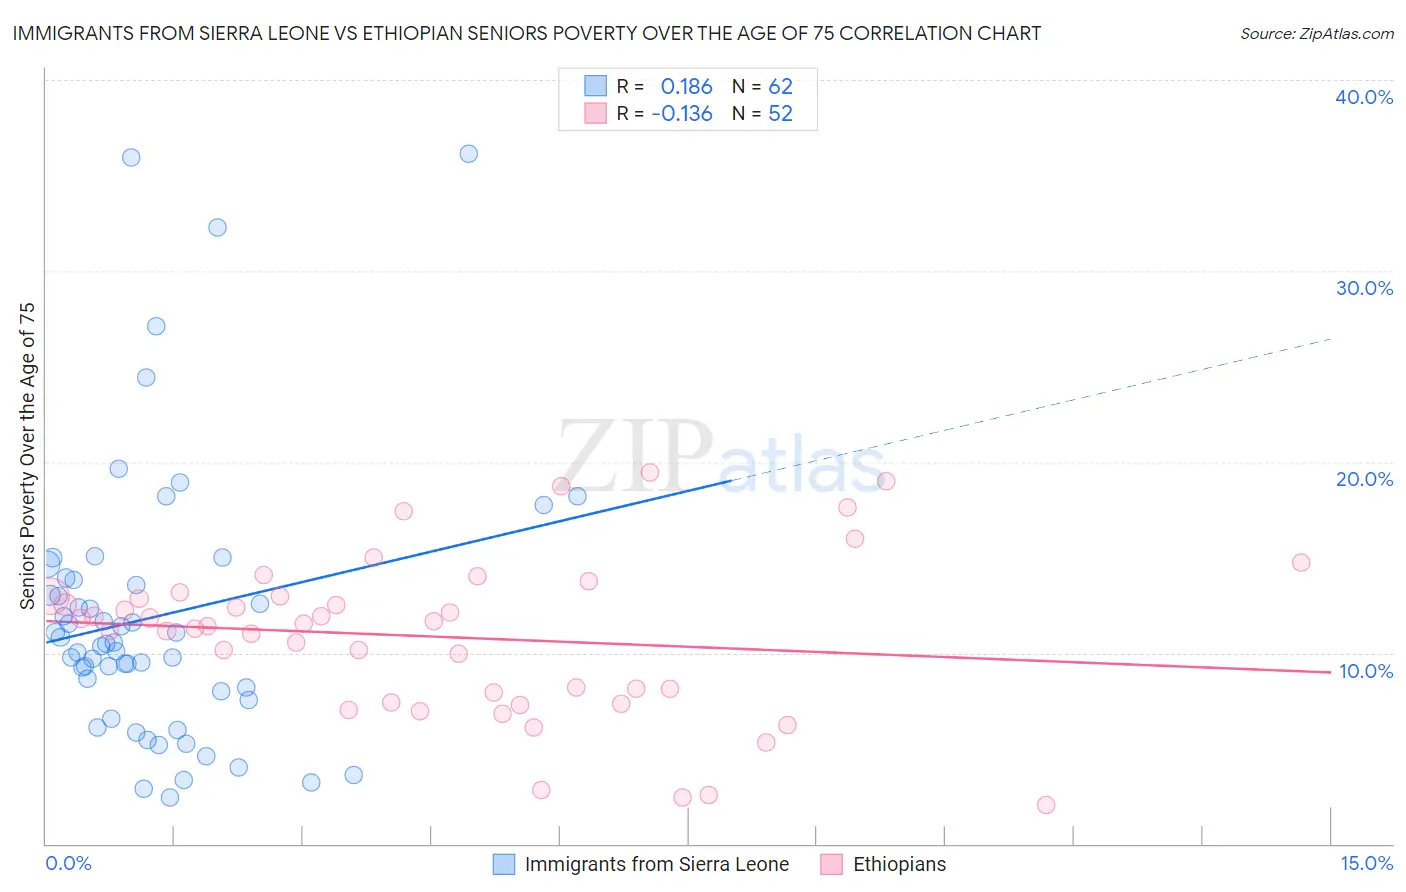 Immigrants from Sierra Leone vs Ethiopian Seniors Poverty Over the Age of 75